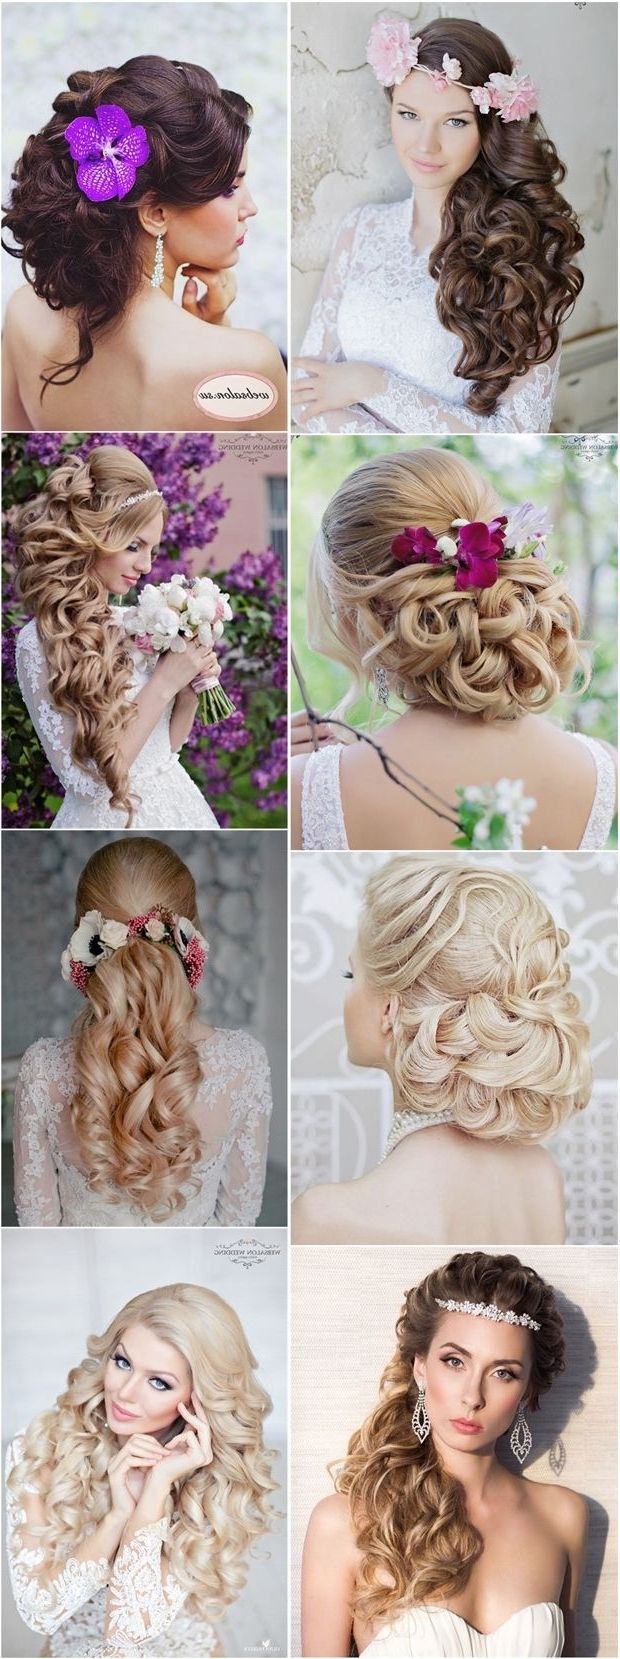 Best 32 Hairstyles: Curls Images On Pinterest (View 5 of 15)